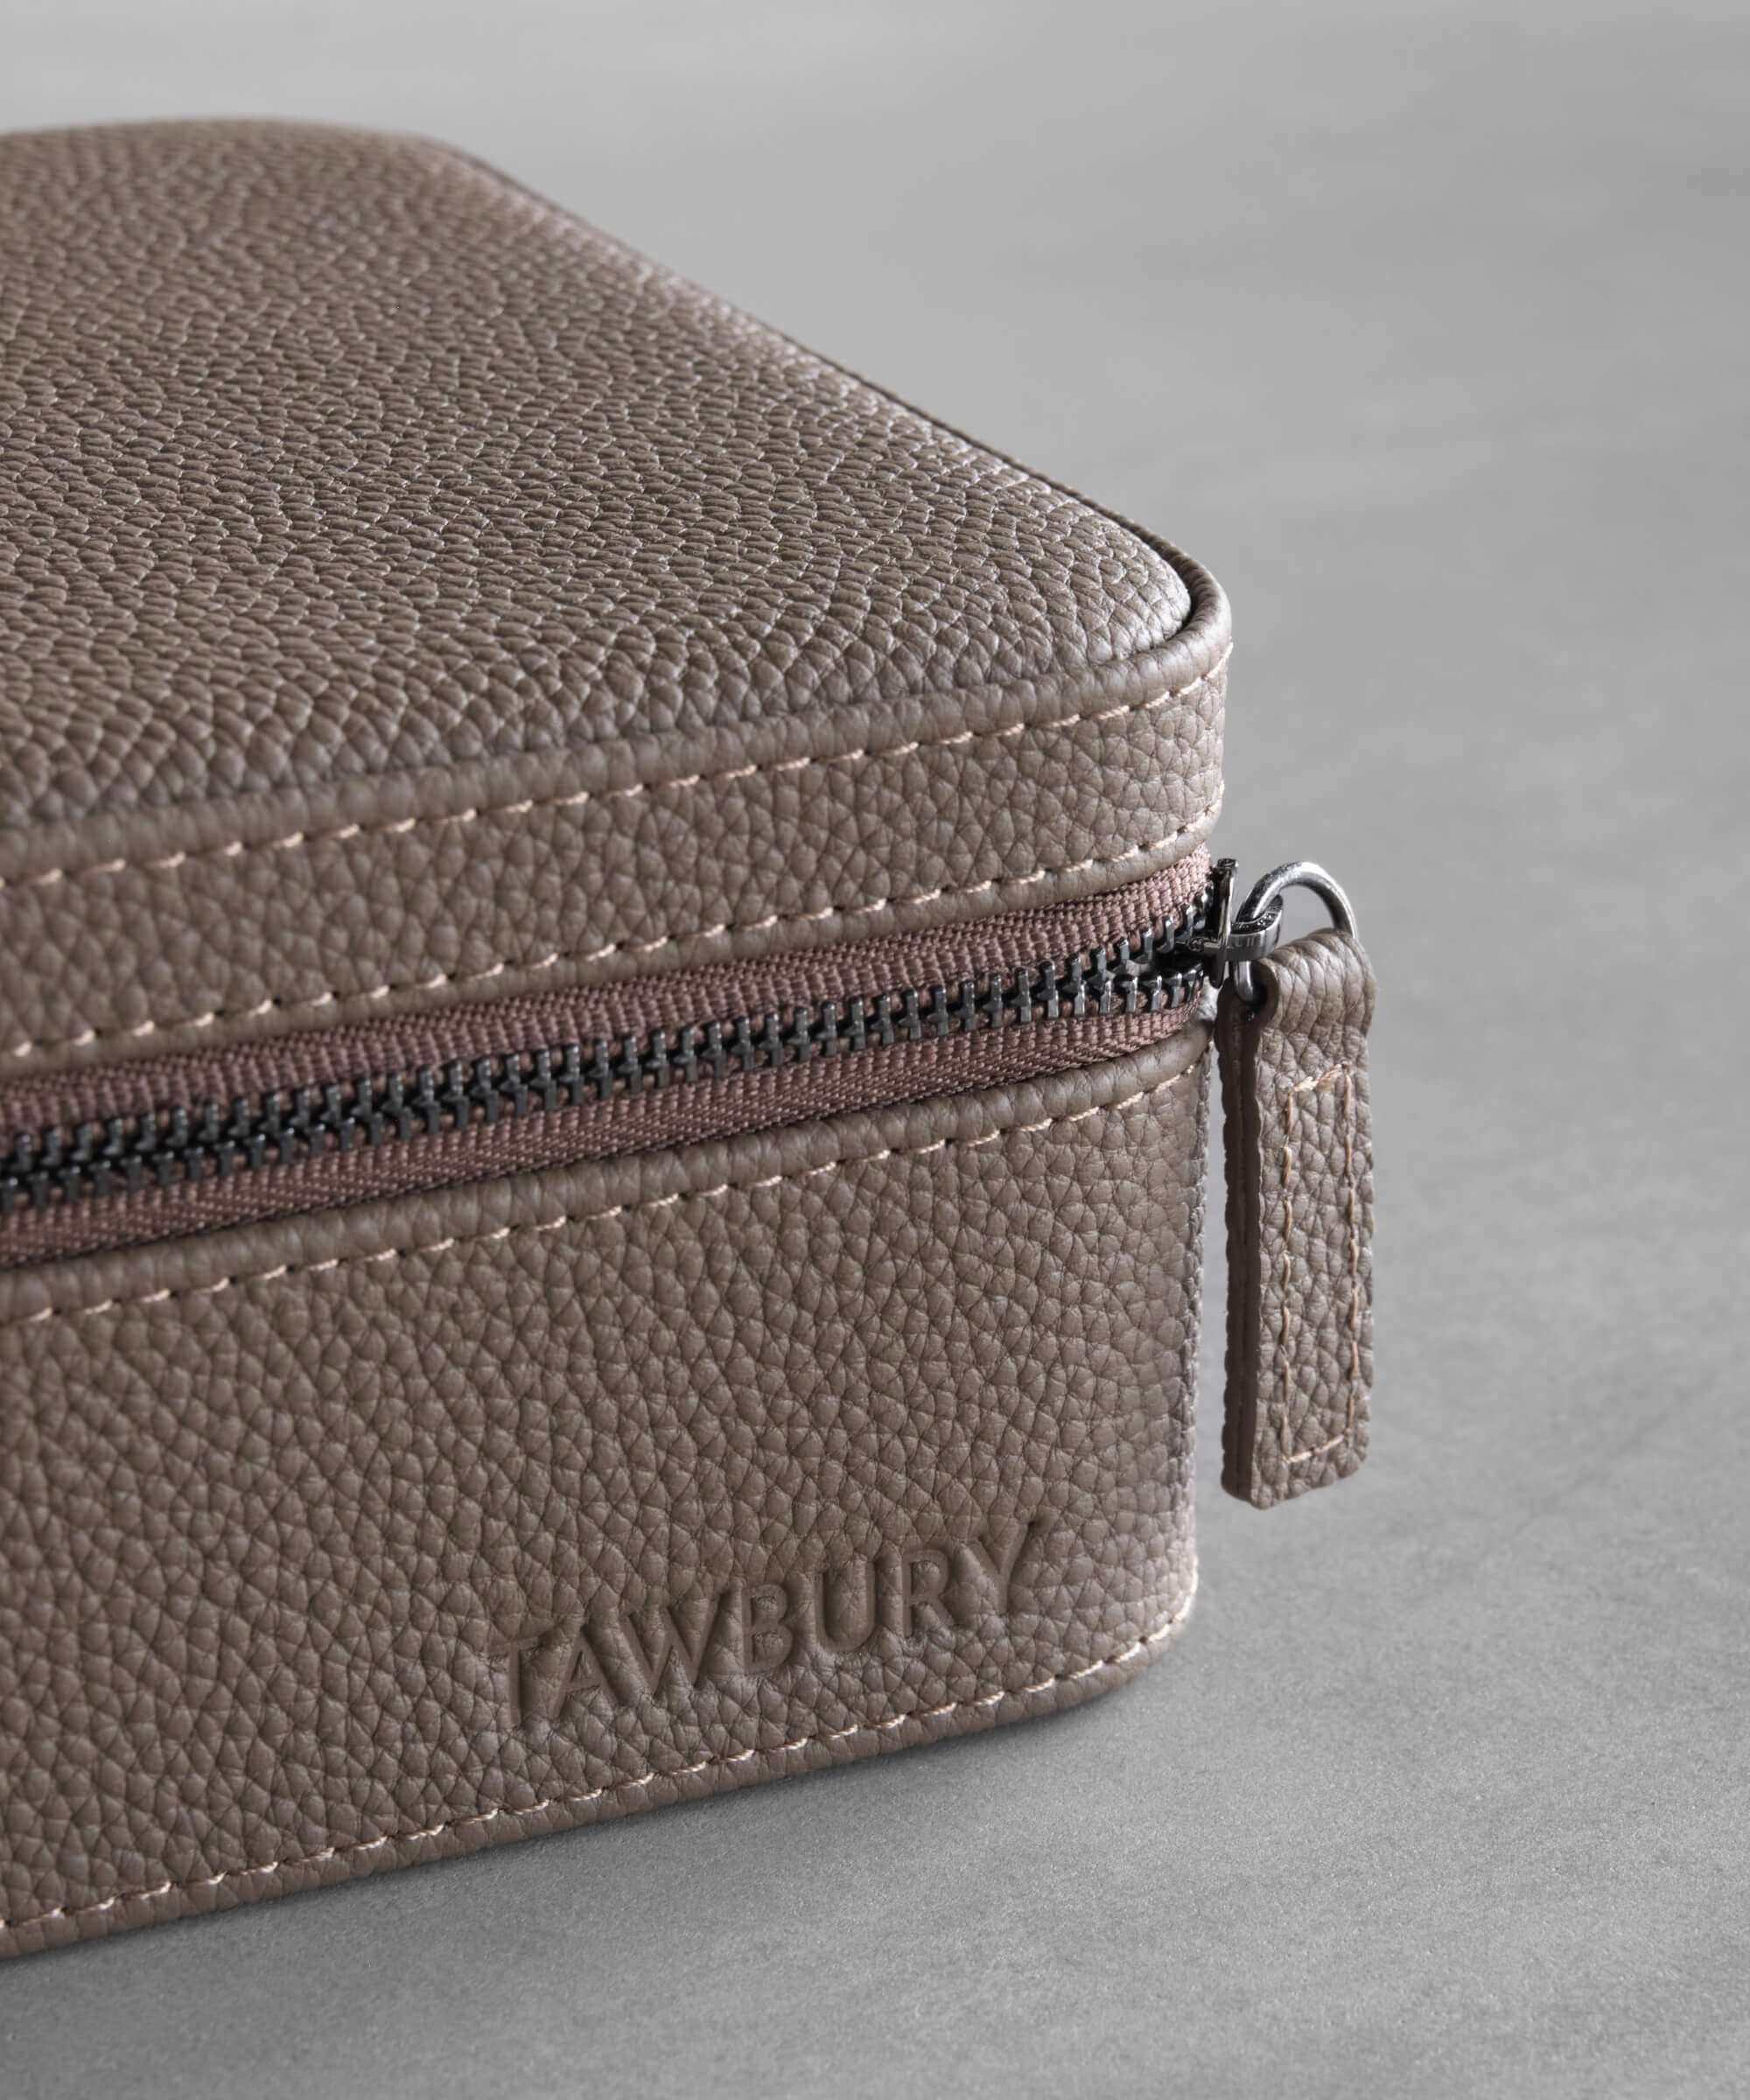 A Fraser 3 Watch Travel Case with Storage - Taupe by TAWBURY, providing protection for the watch lover.